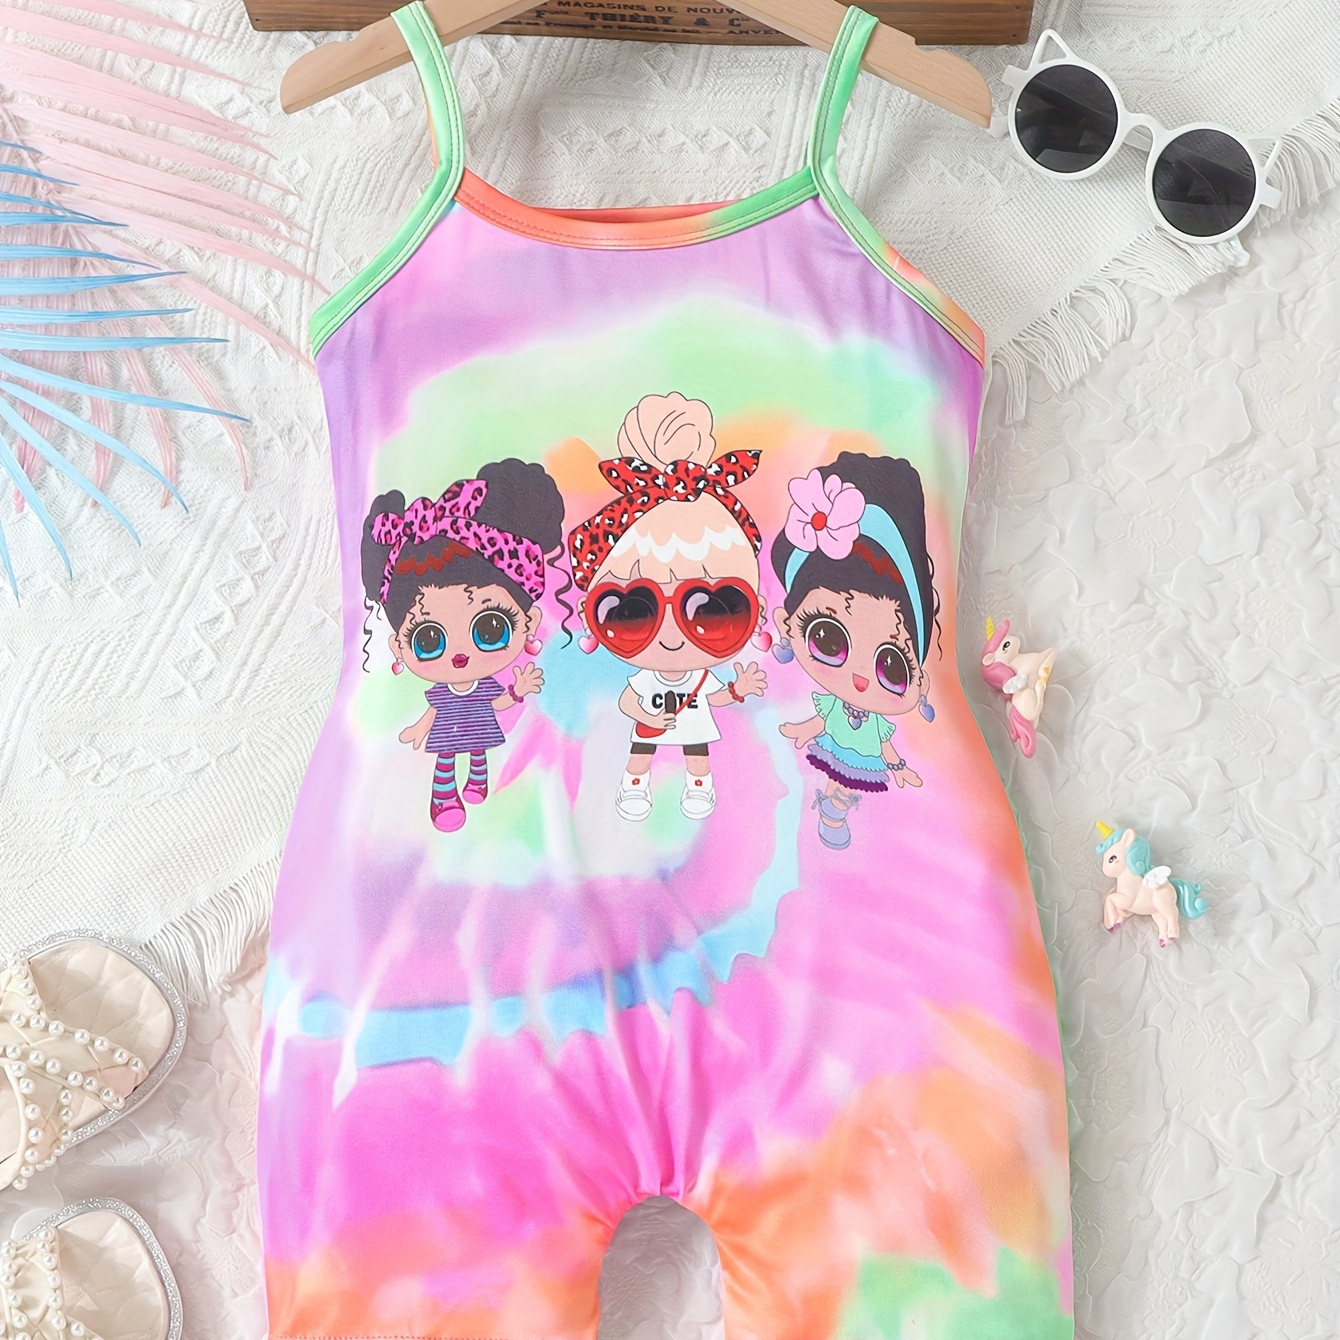 

Knit Tie-dye Pattern Cartoon Figure Graphic Cami Romper For Girls, Trendy Summer Jumpsuit Vacation Gift, Kids' Clothing